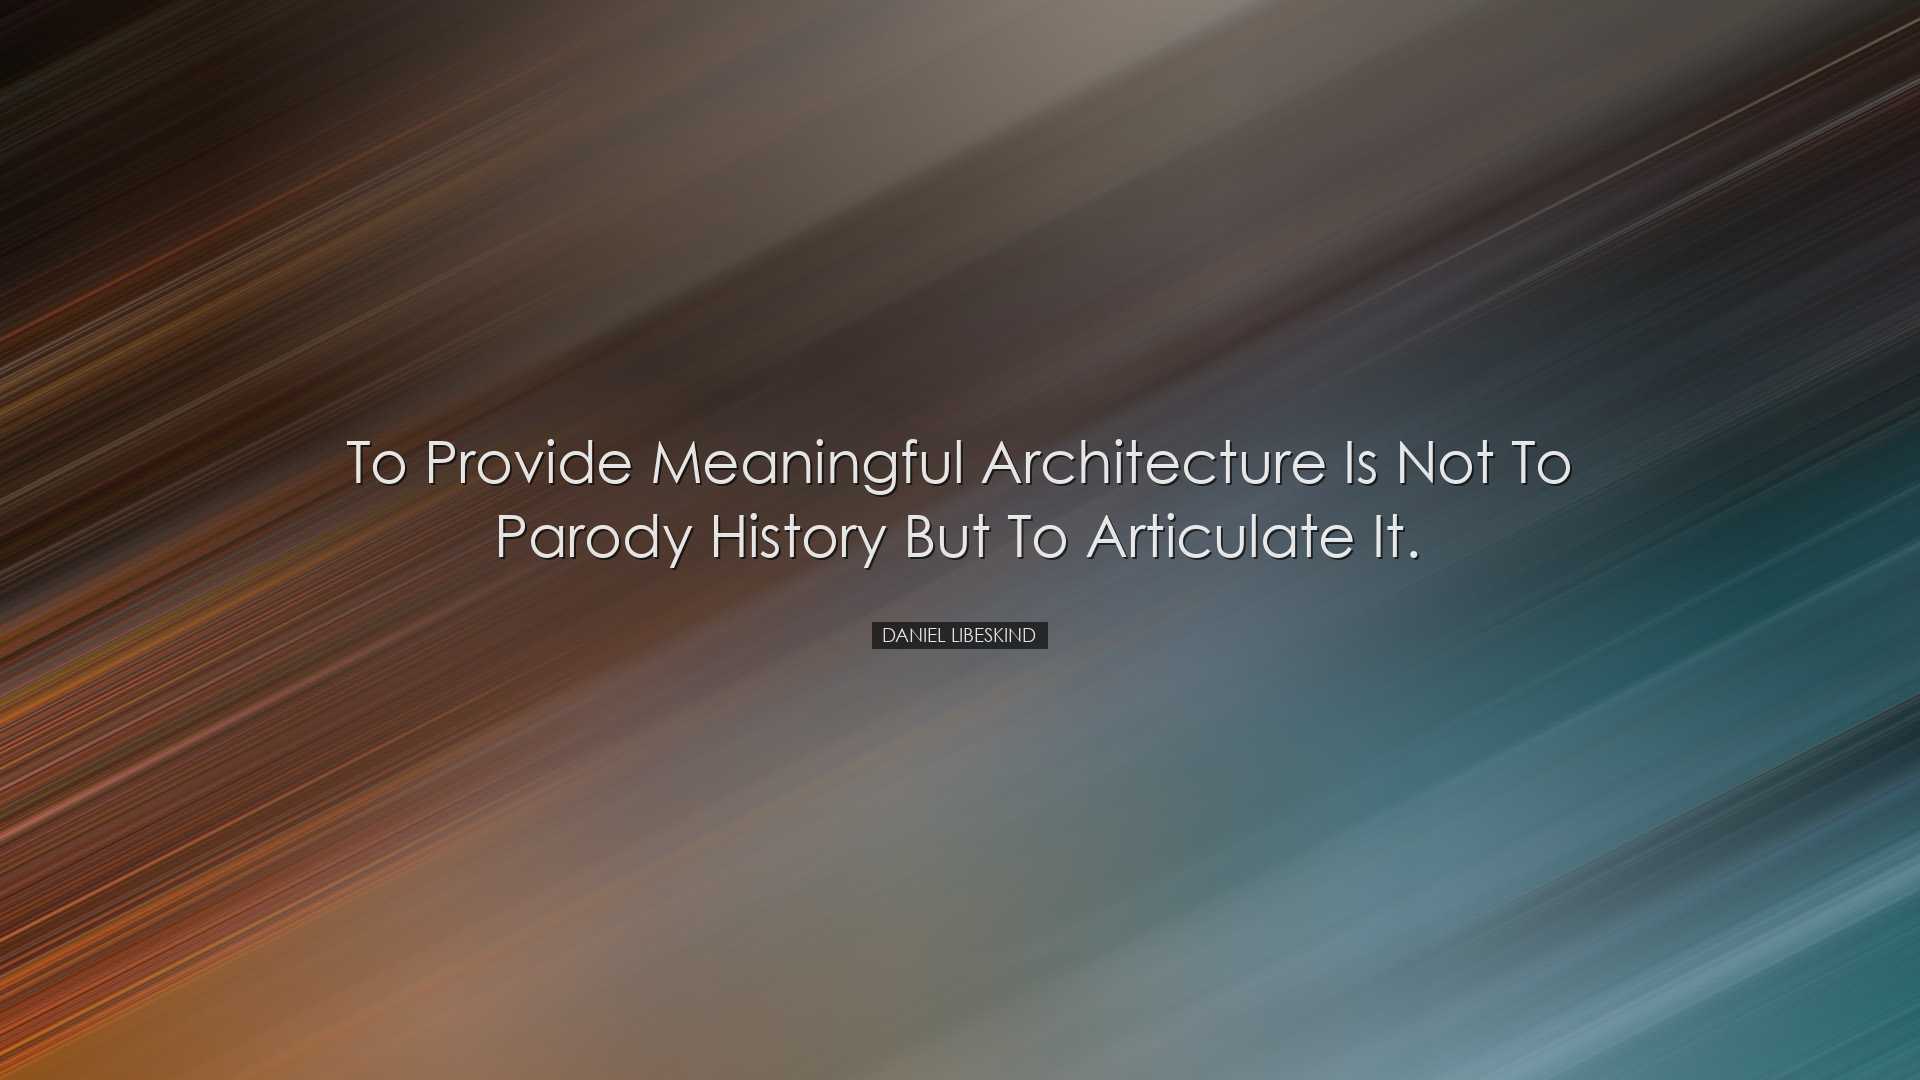 To provide meaningful architecture is not to parody history but to